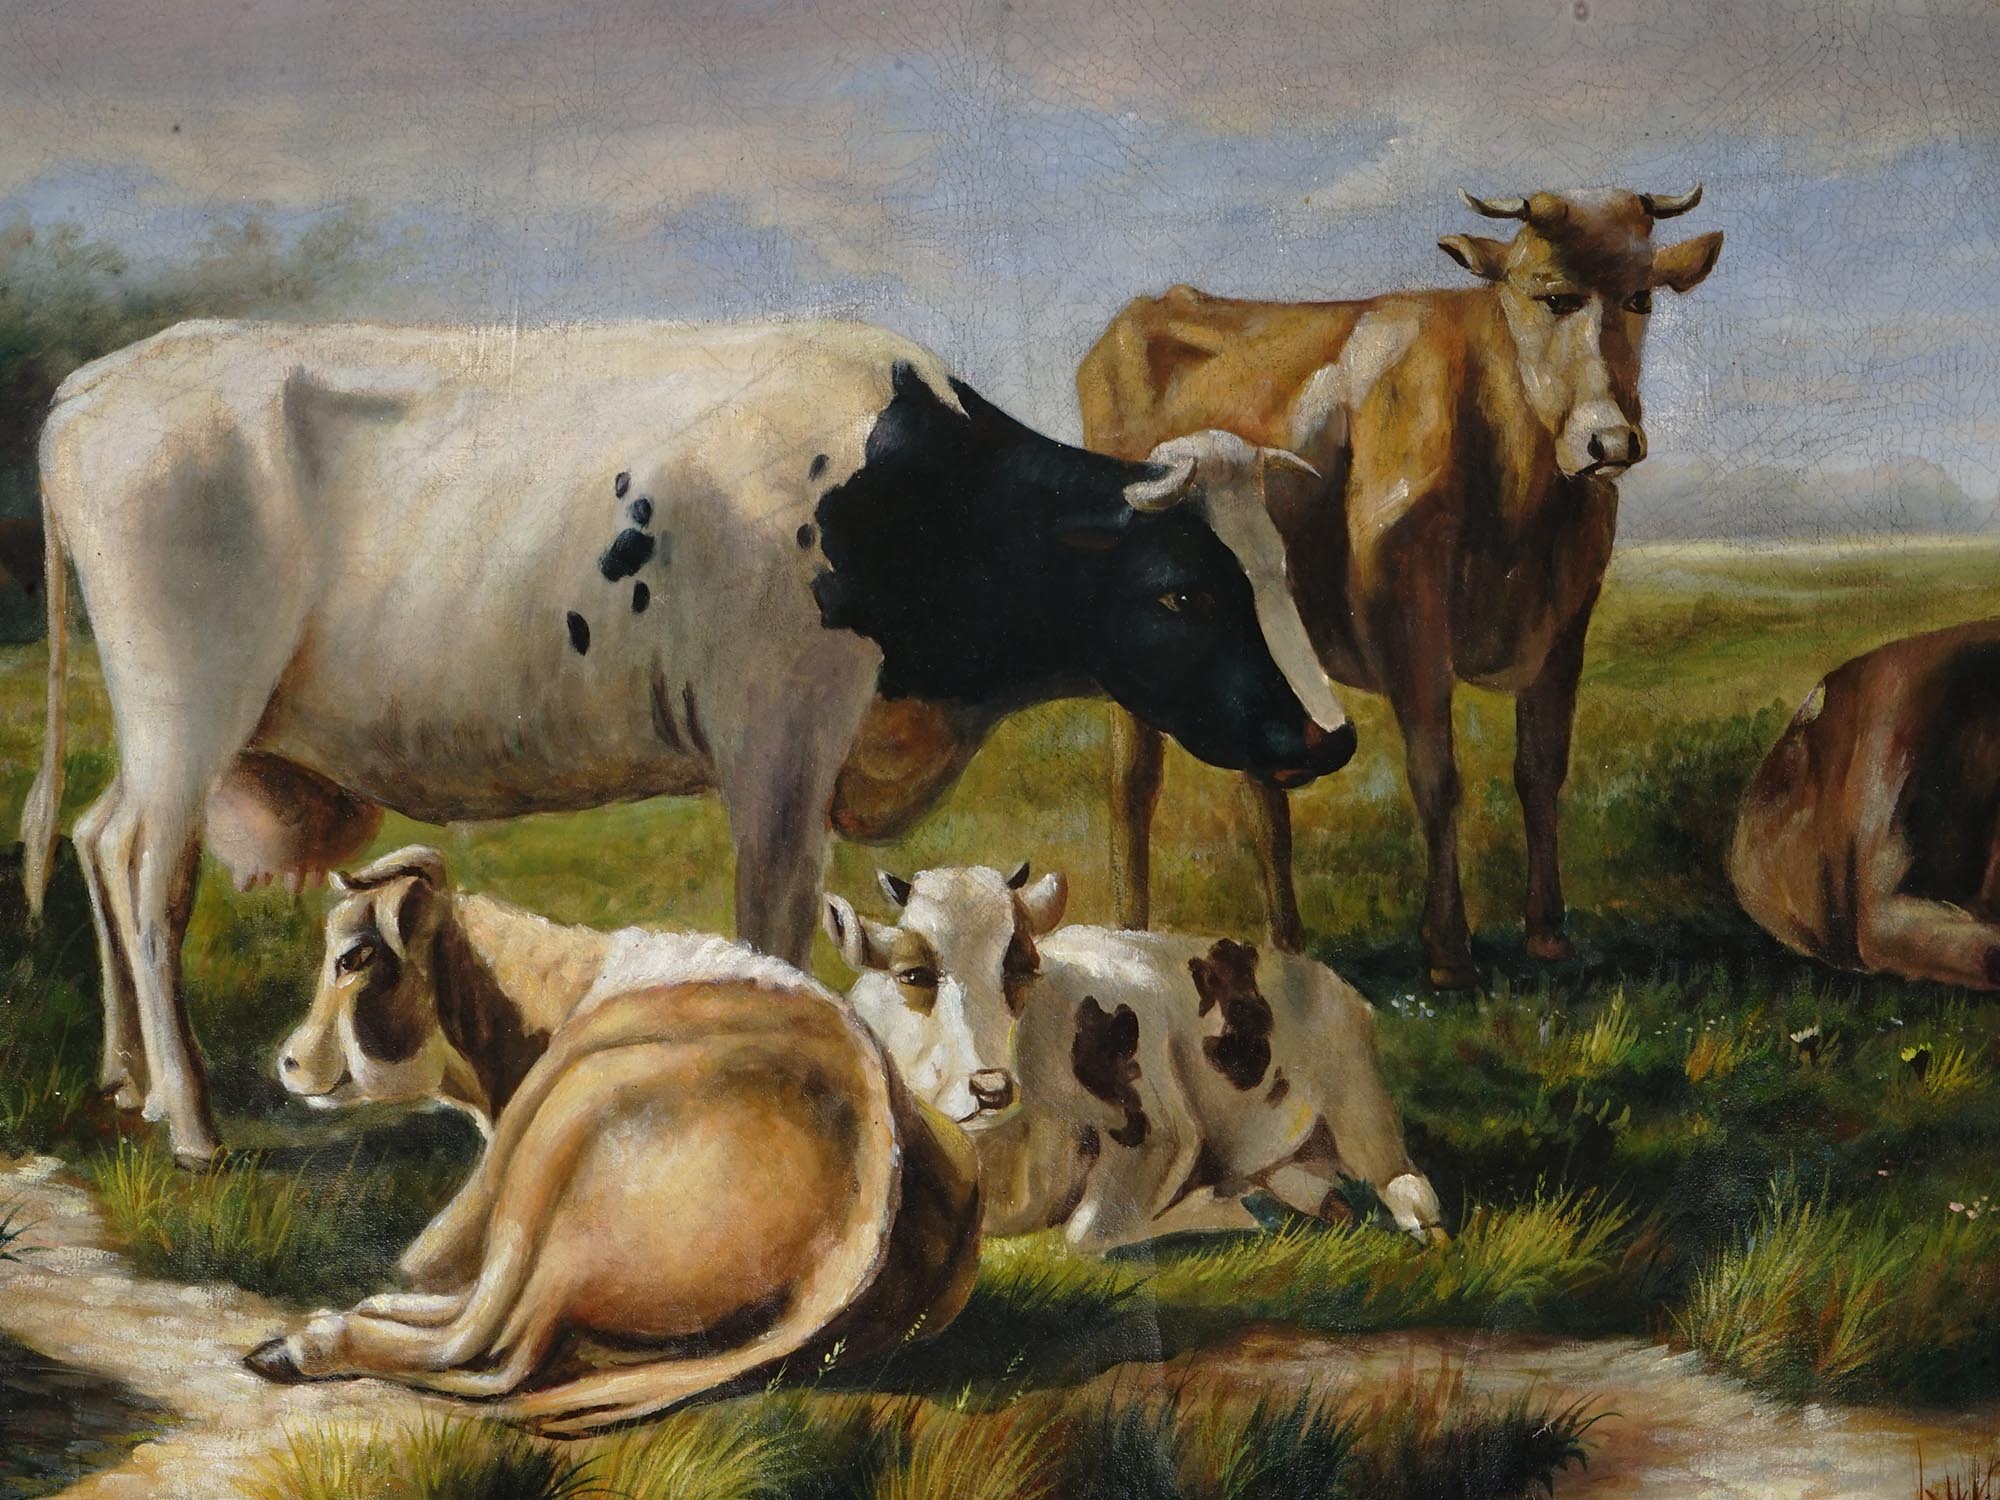 OIL ON CANVAS PAINTING GREEN LANDSCAPE WITH COWS PIC-1